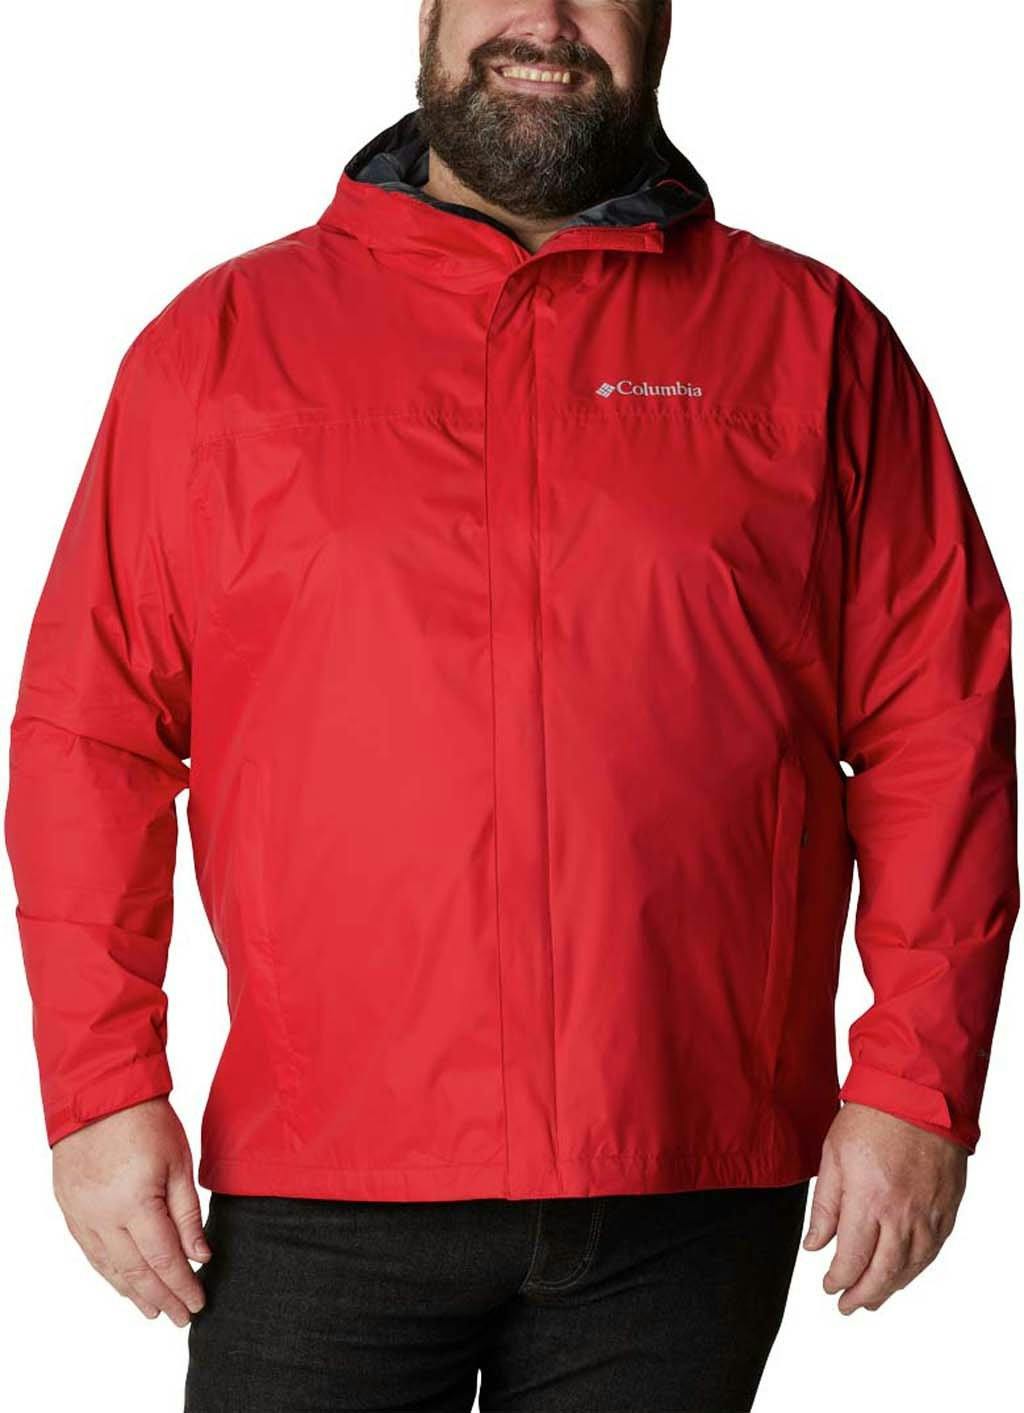 Product image for Watertight II Jacket Plus Size - Men's